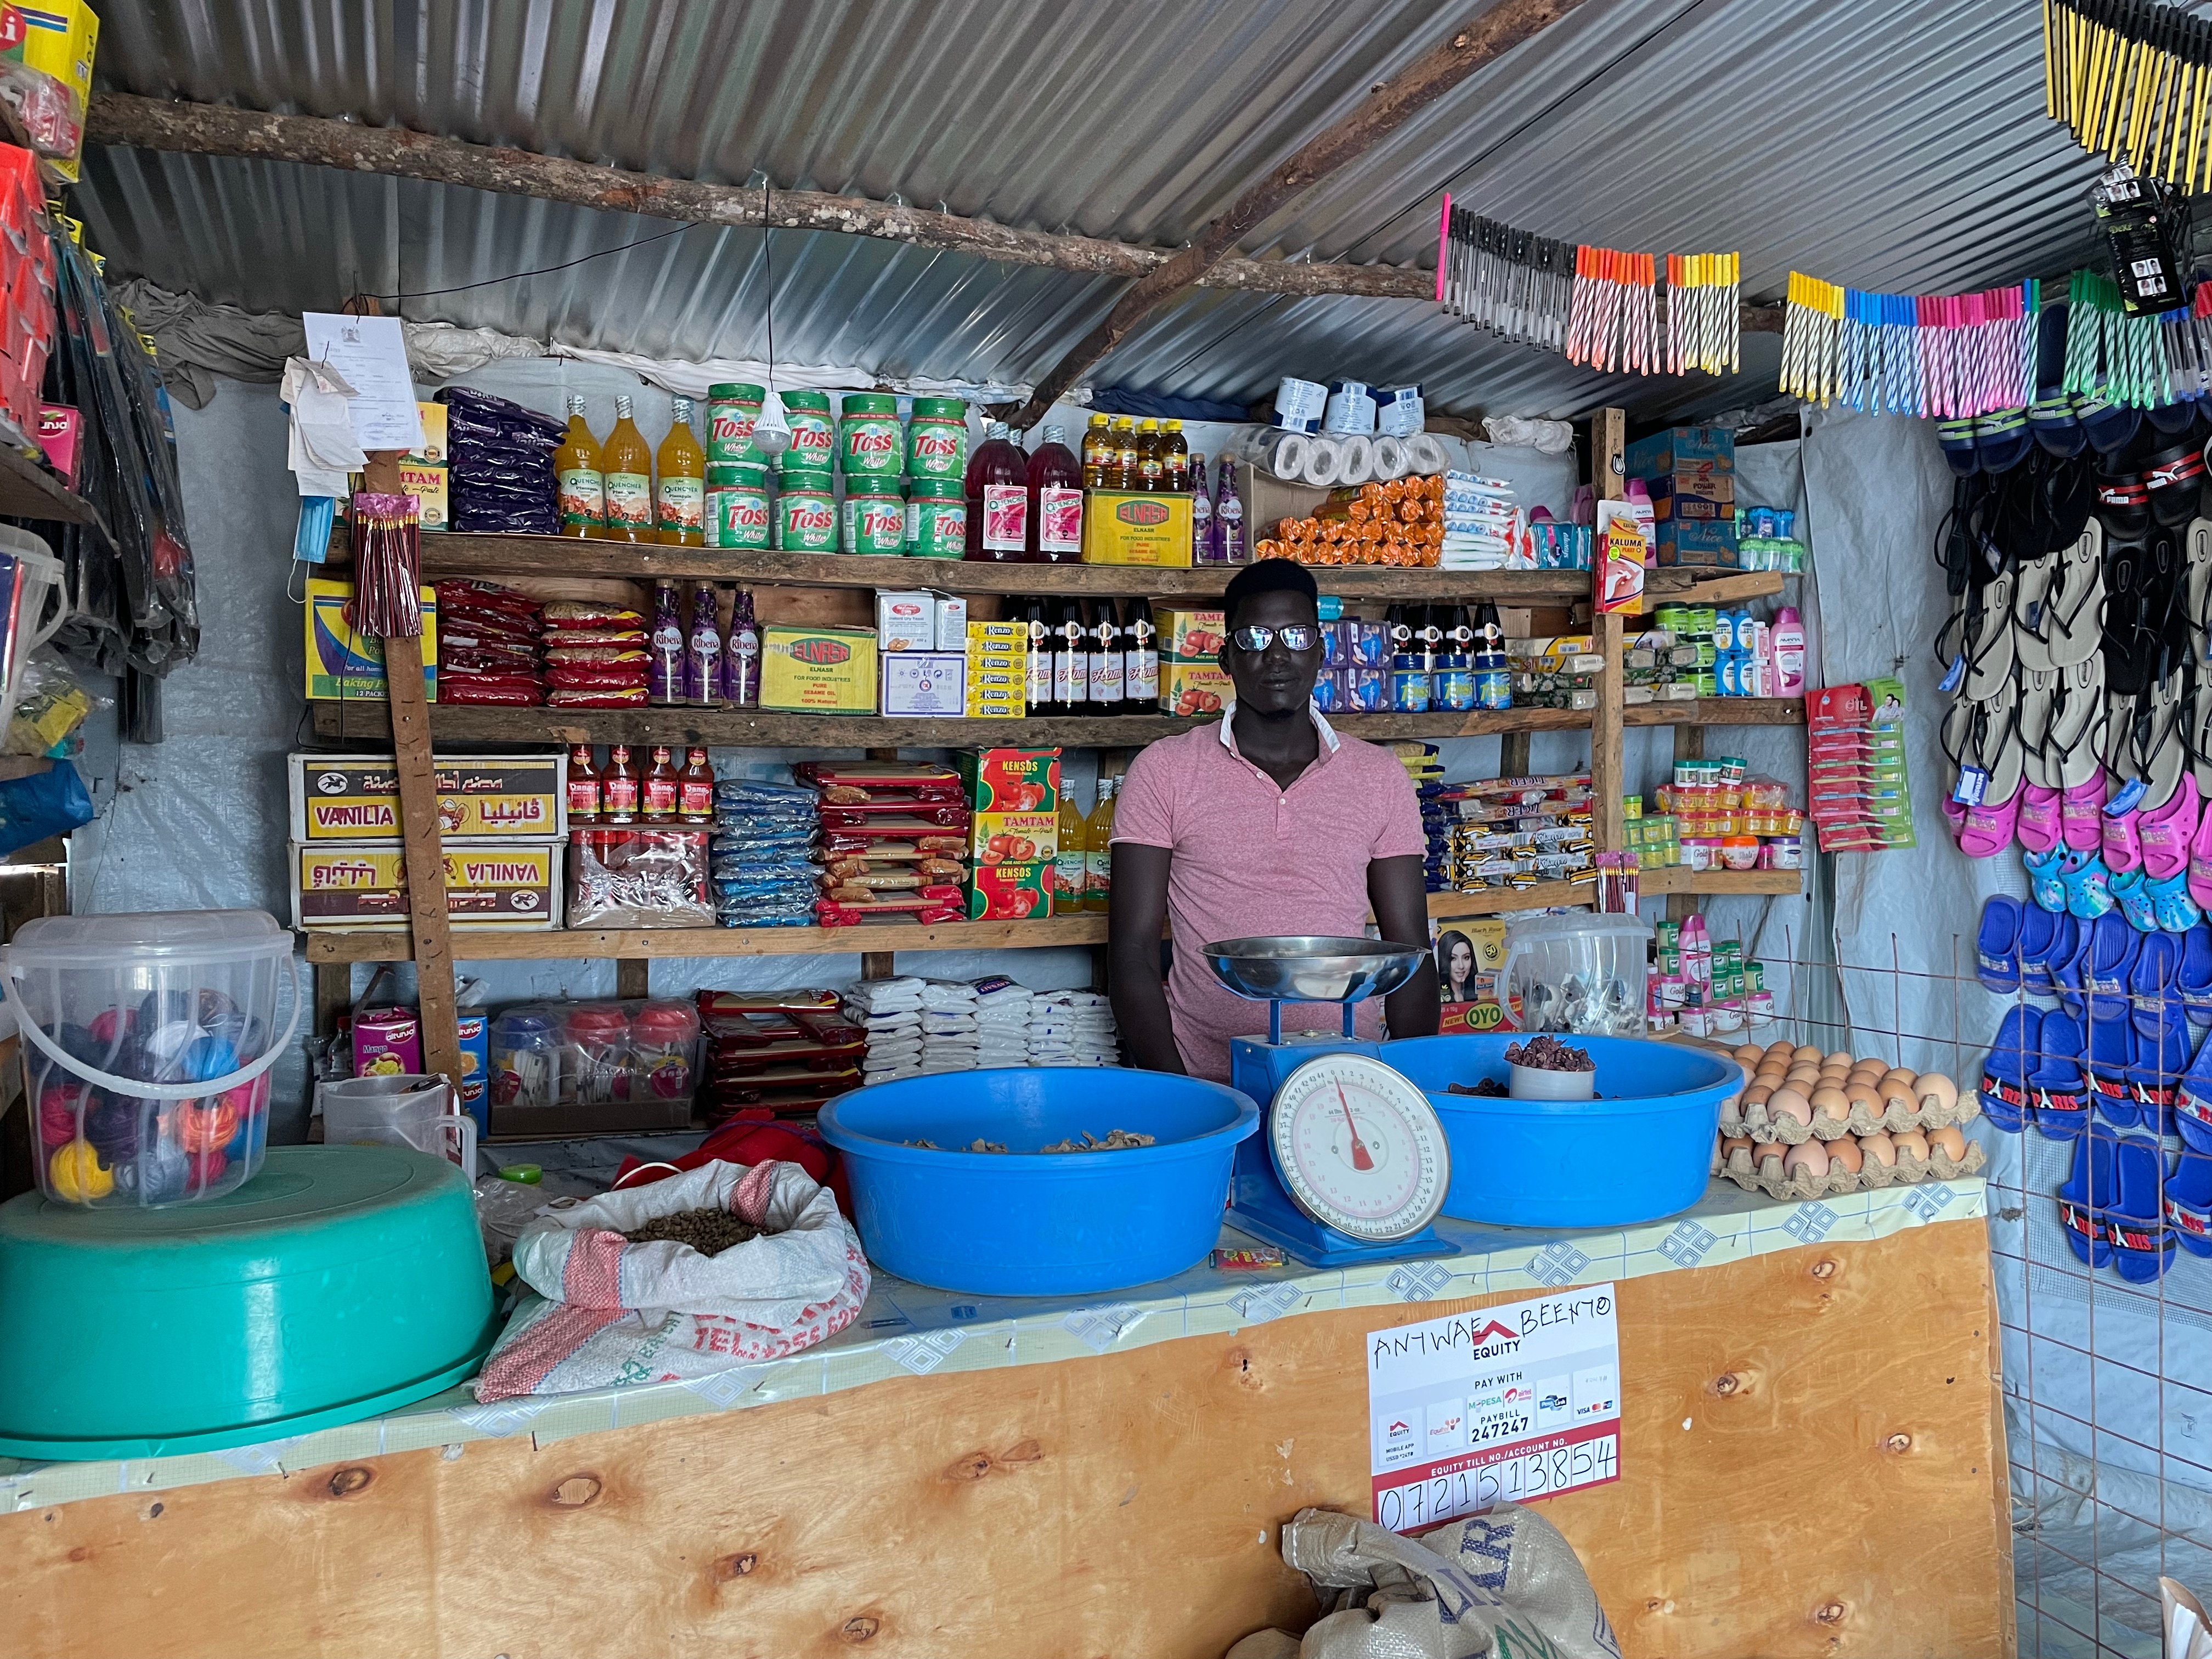 A Black man with glasses stands in a fully stocked shop